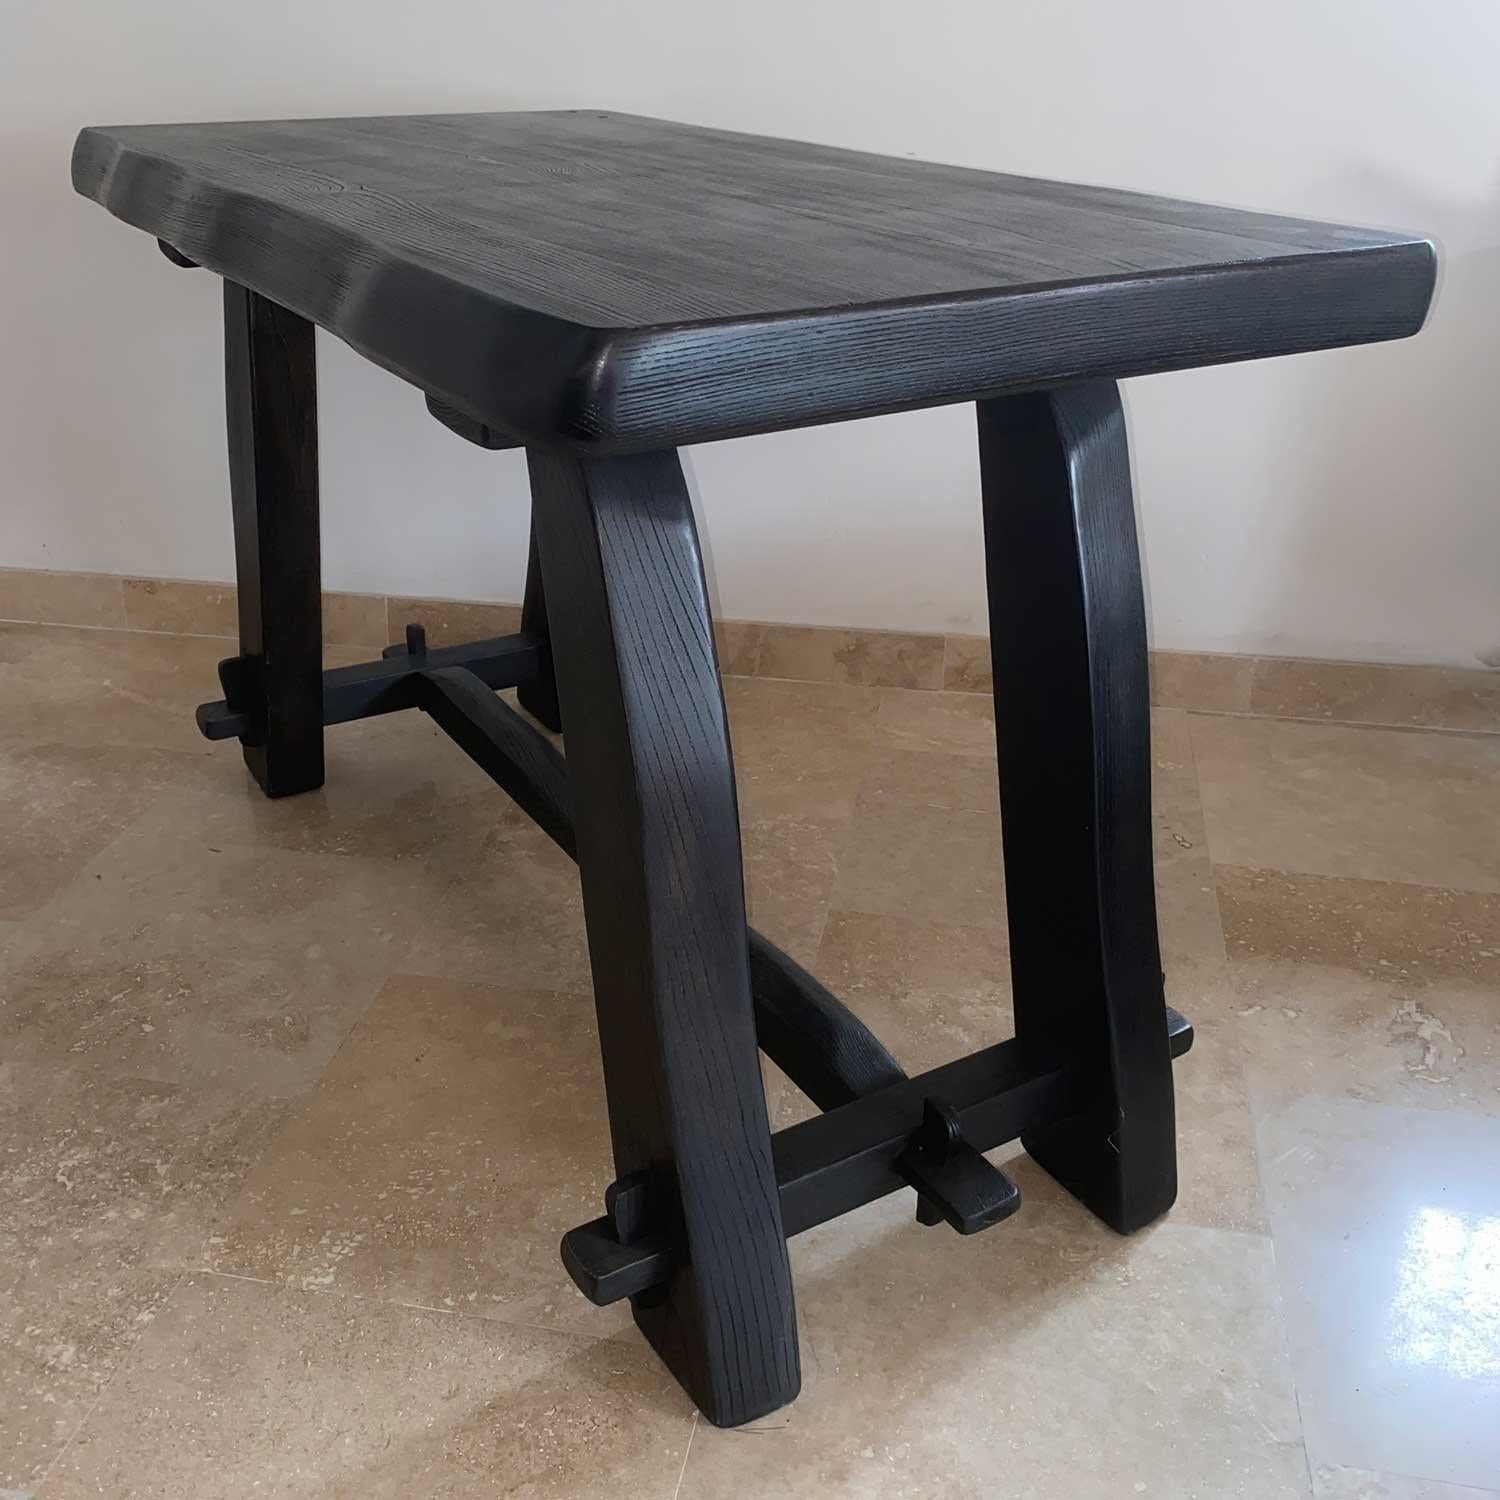 OLAVI TAPIO HANNINEN 
desk table in black lacquered elm, this is the smallest model in this series. This table is very influenced by the work of Alexandre Noll